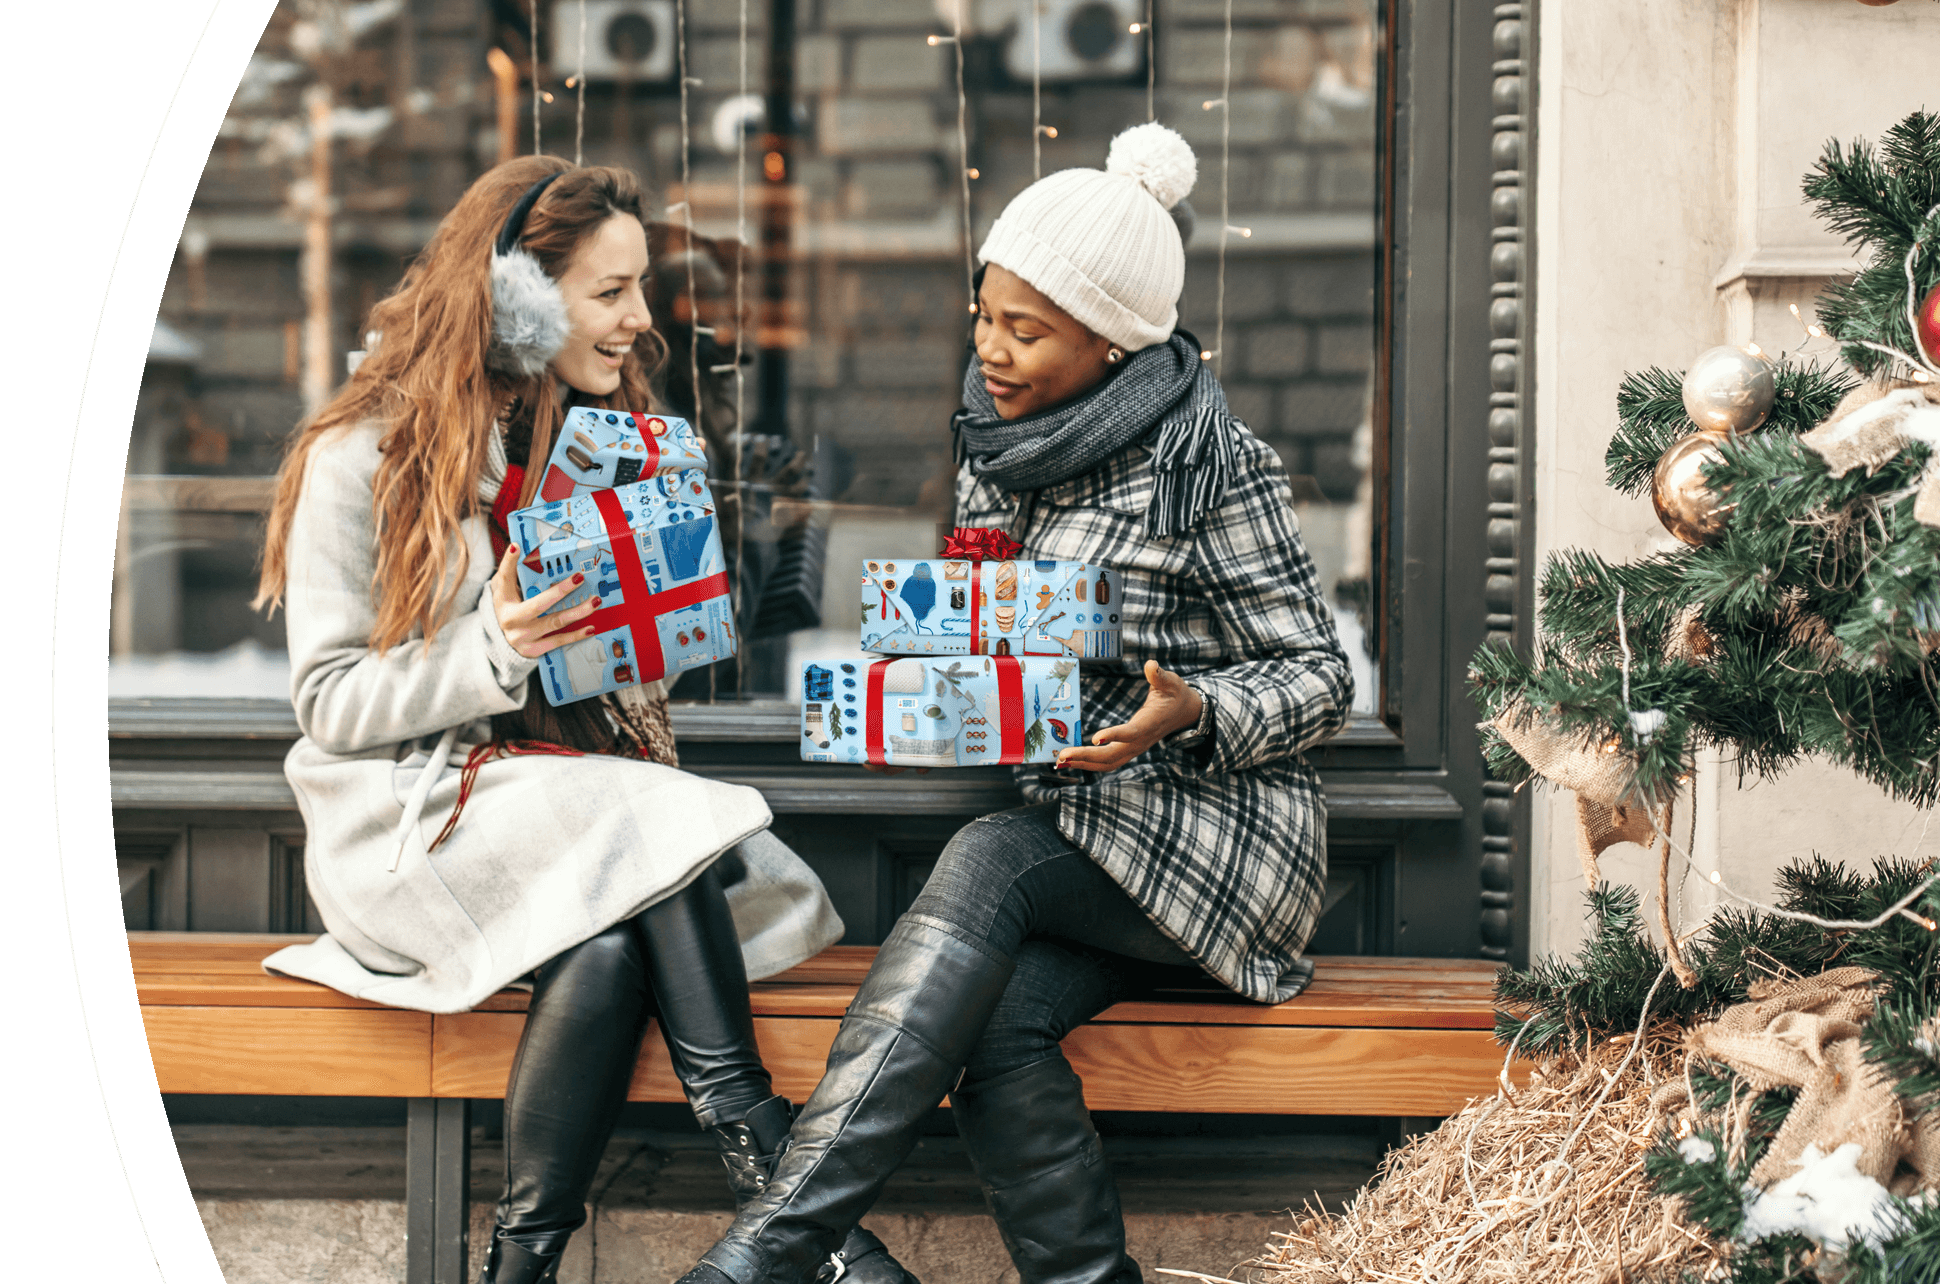 Two women exchange gifts in front of a store.